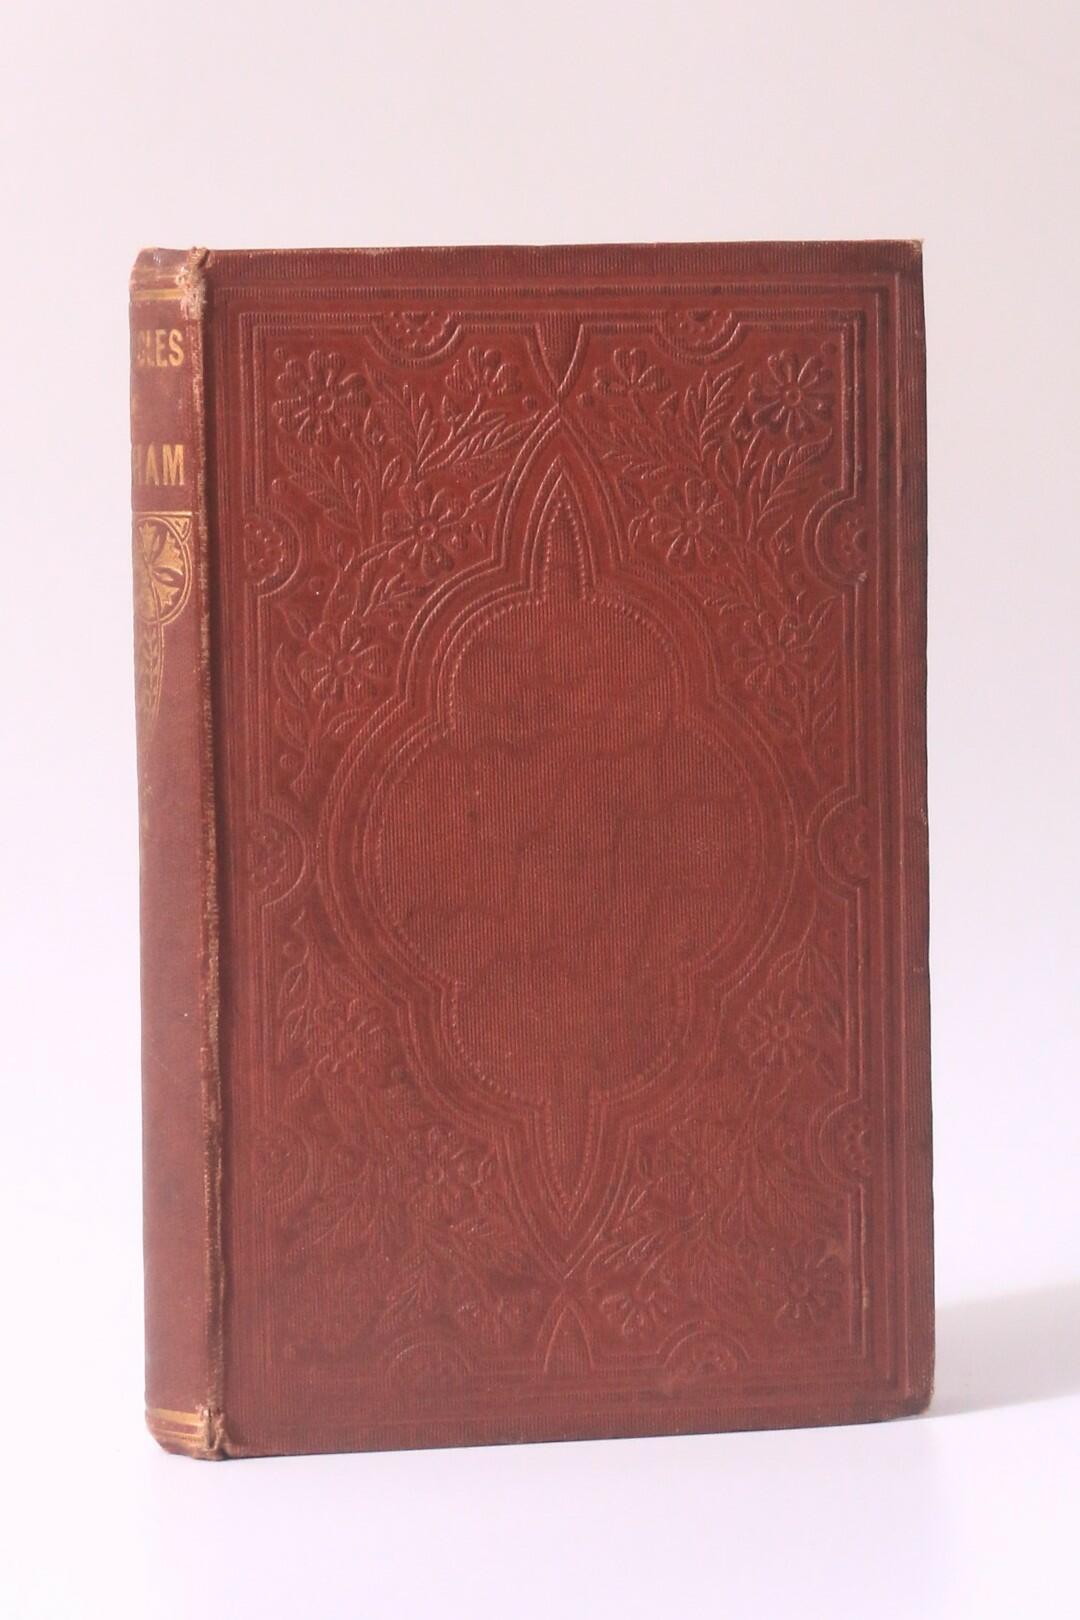 Anonymous [John Smith] - Chronicles of Gotham, or, The Facetious History of Official Proceedings - No Publisher, 1856, First Edition.